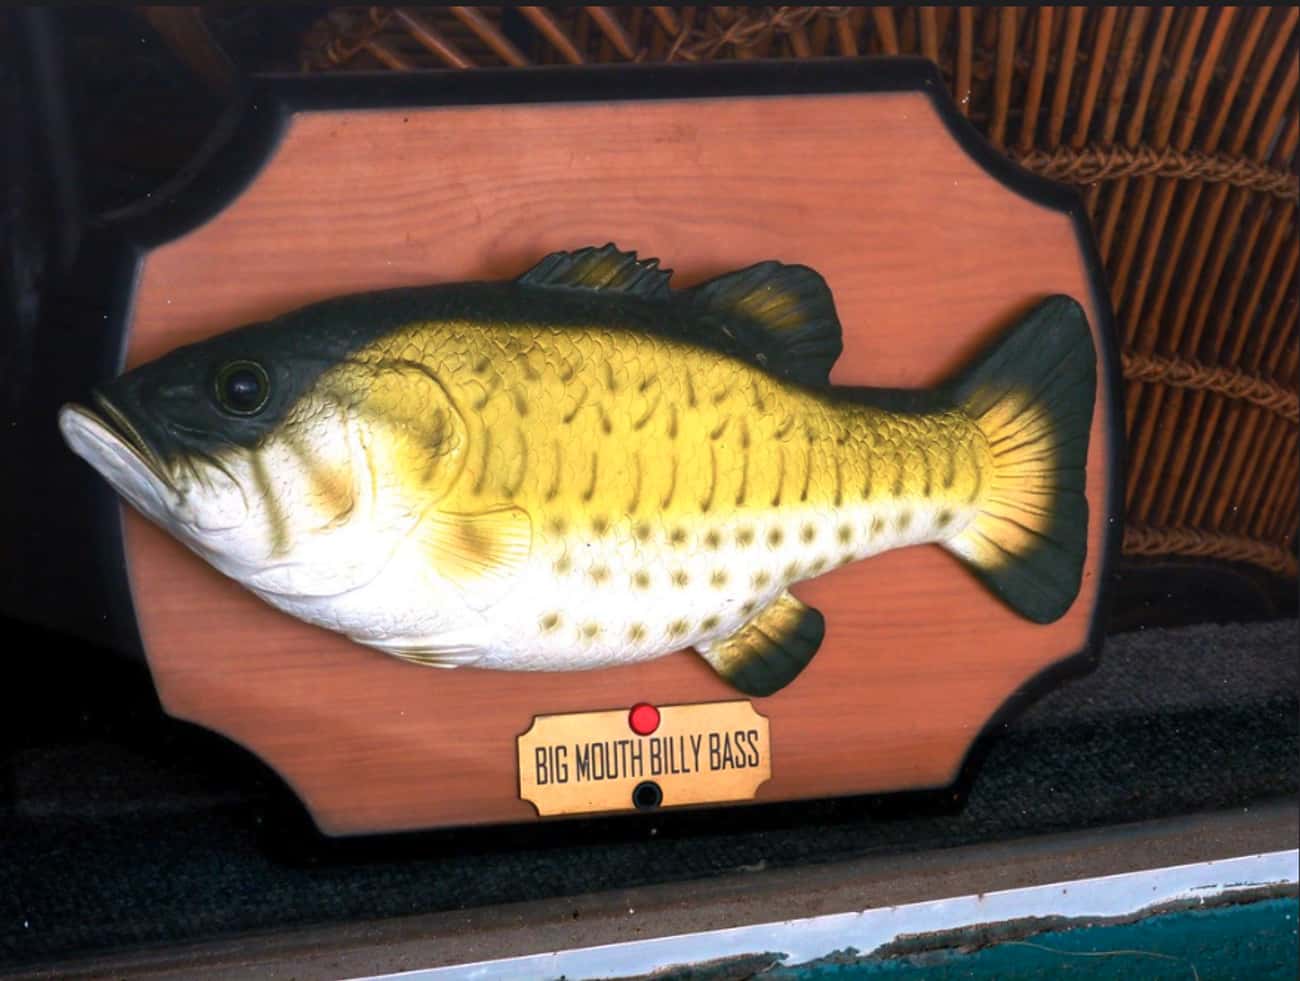 Bill Clinton, Tony Blair, And Queen Elizabeth All Owned A Big Mouth Billy Bass